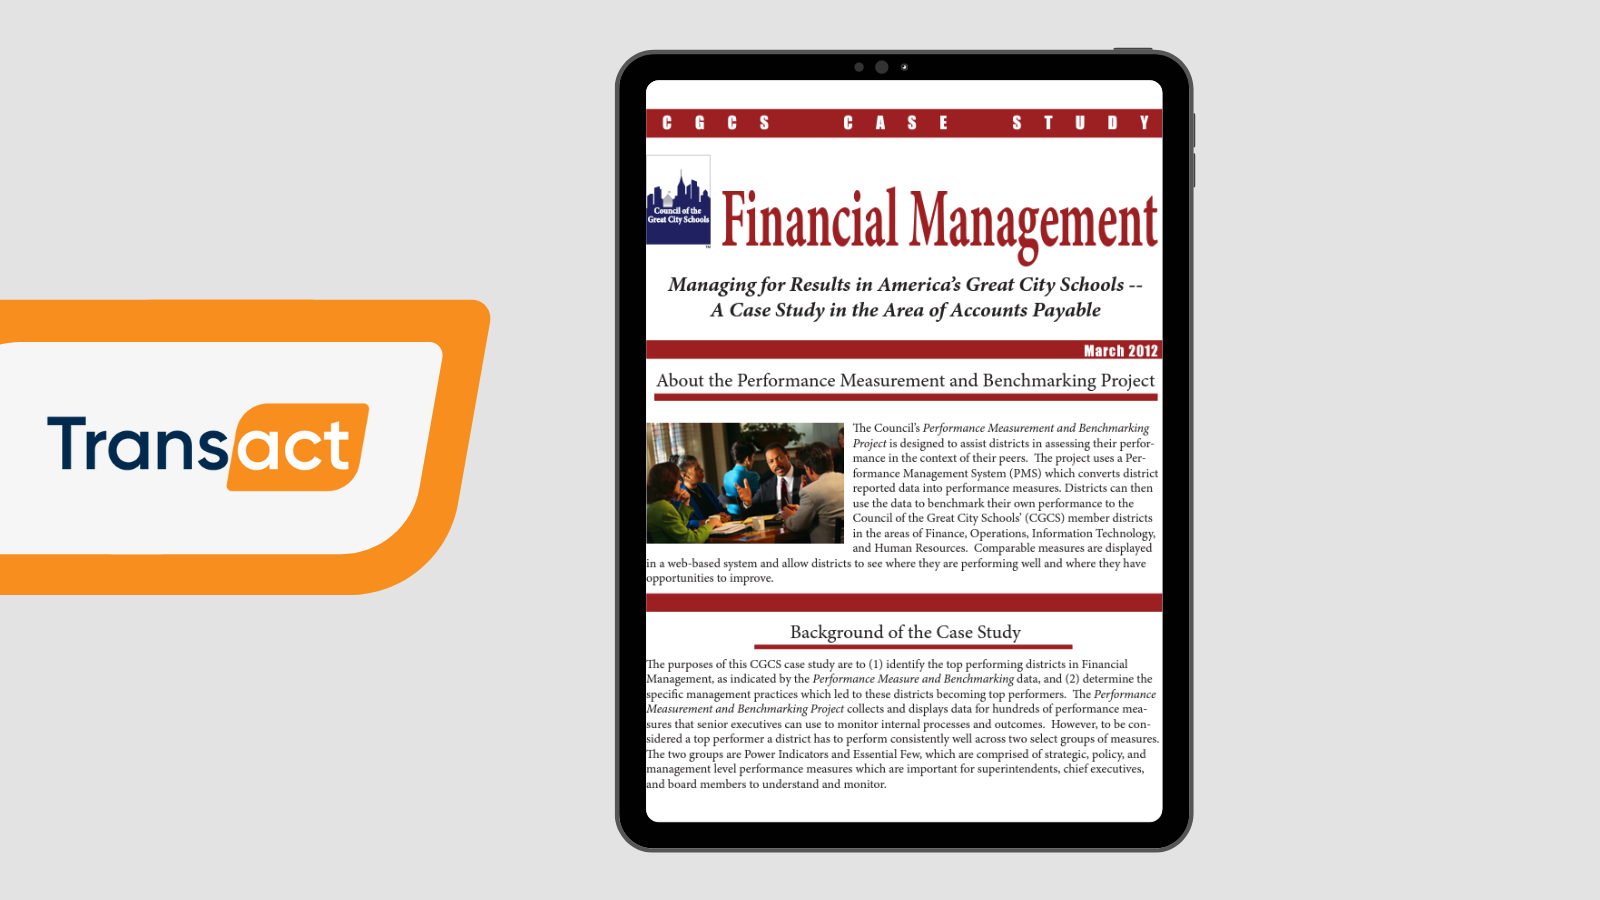 Financial Management - Managing for Results in America’s Great City Schools - A Case Study in the Area of Accounts Payable